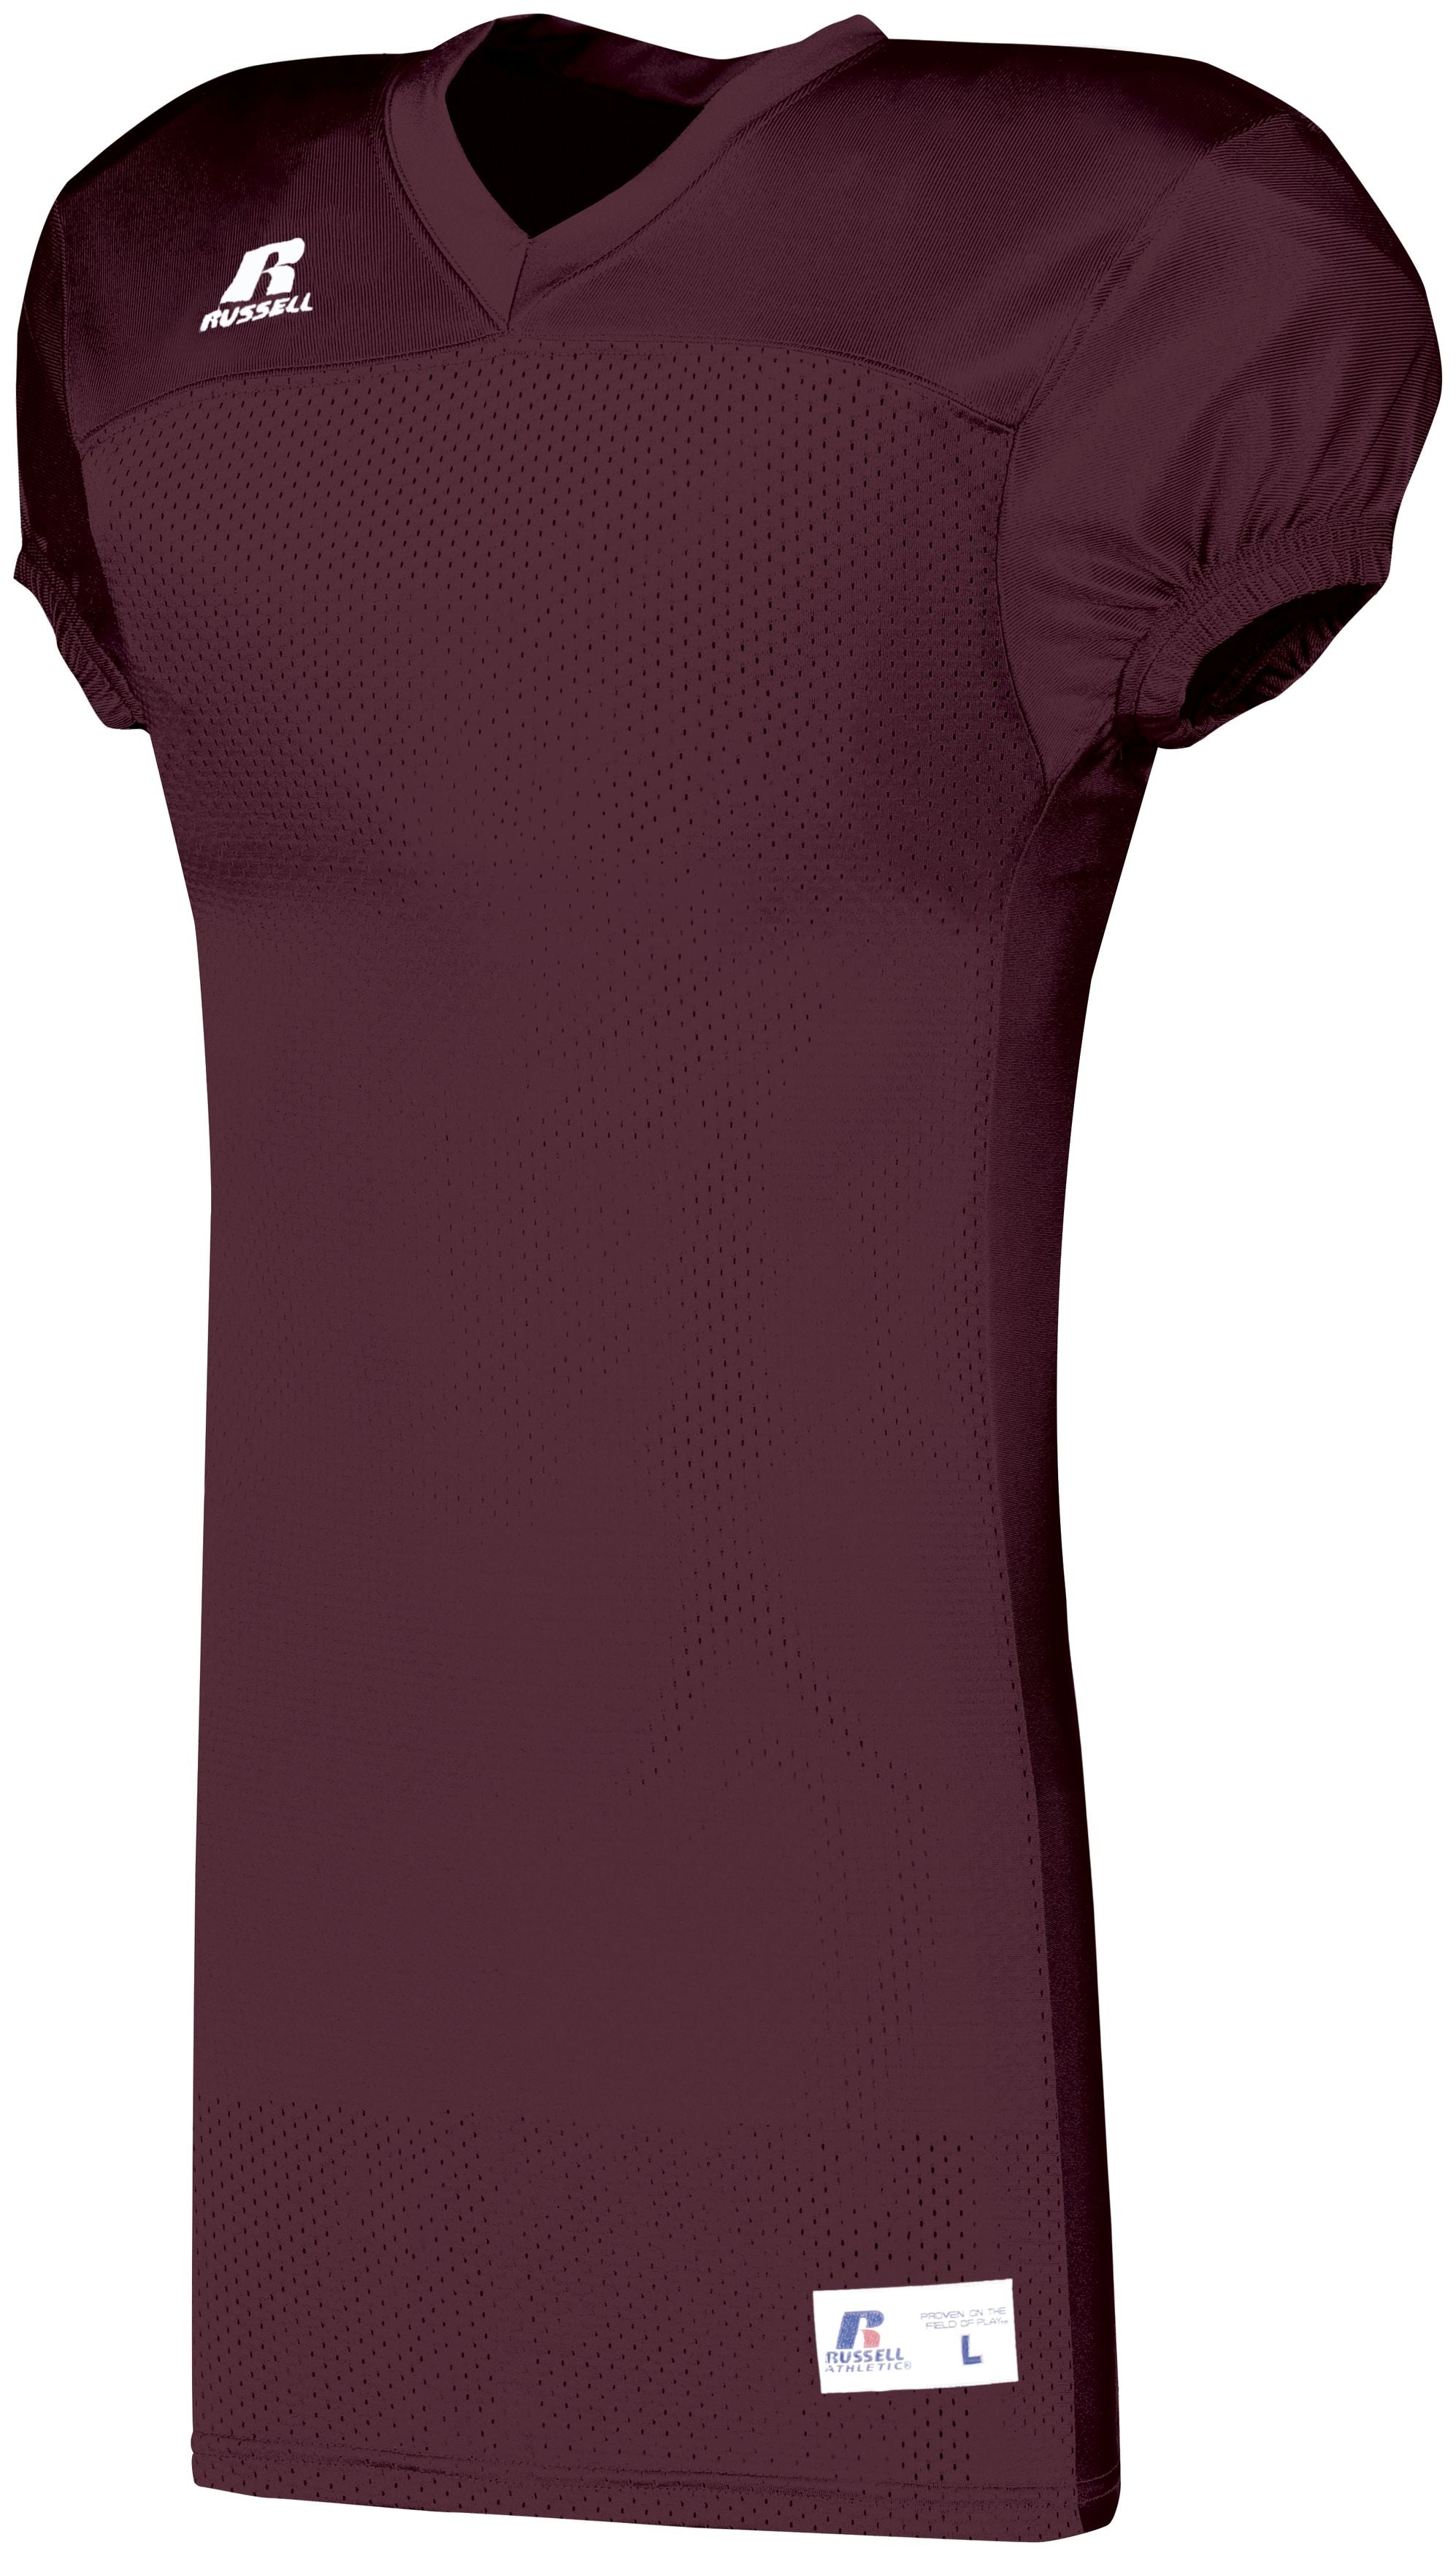 Russell Athletic Solid Jersey With Side Inserts in Maroon  -Part of the Adult, Adult-Jersey, Football, Russell-Athletic-Products, Shirts, All-Sports, All-Sports-1 product lines at KanaleyCreations.com